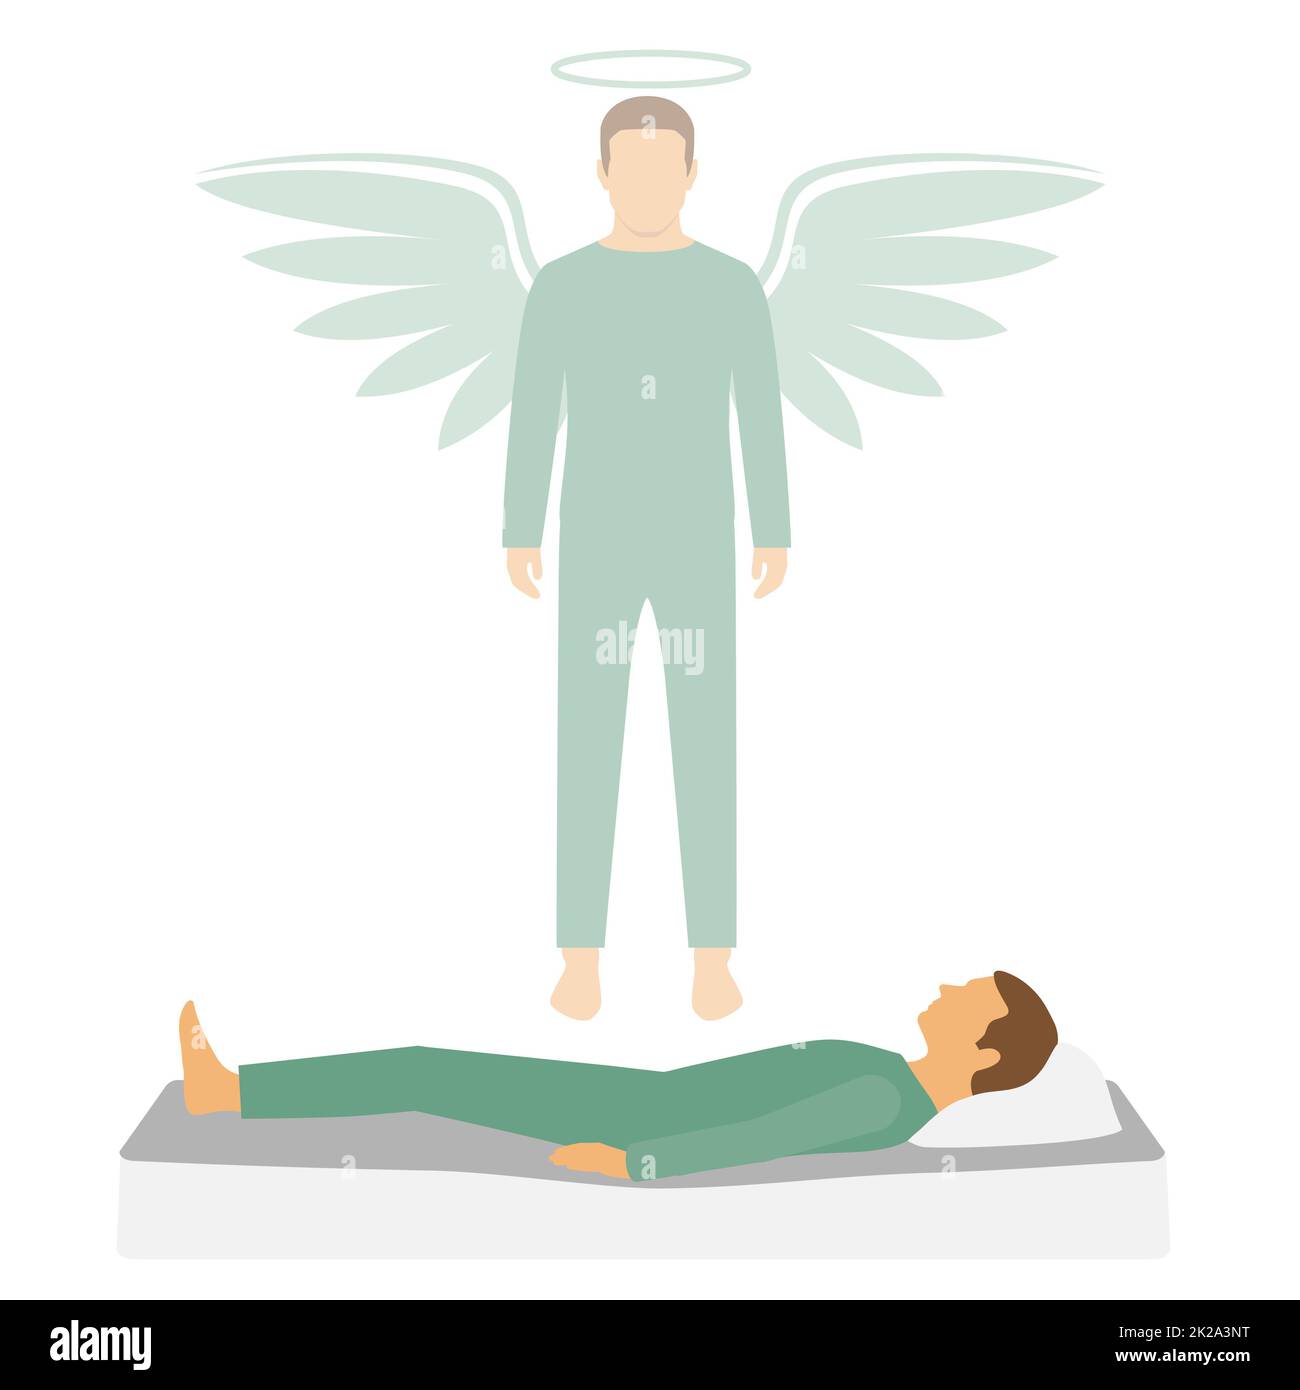 Human Death, Spirit Leaves the Body, angel ghost, person afterlife, vector illustration Stock Photo